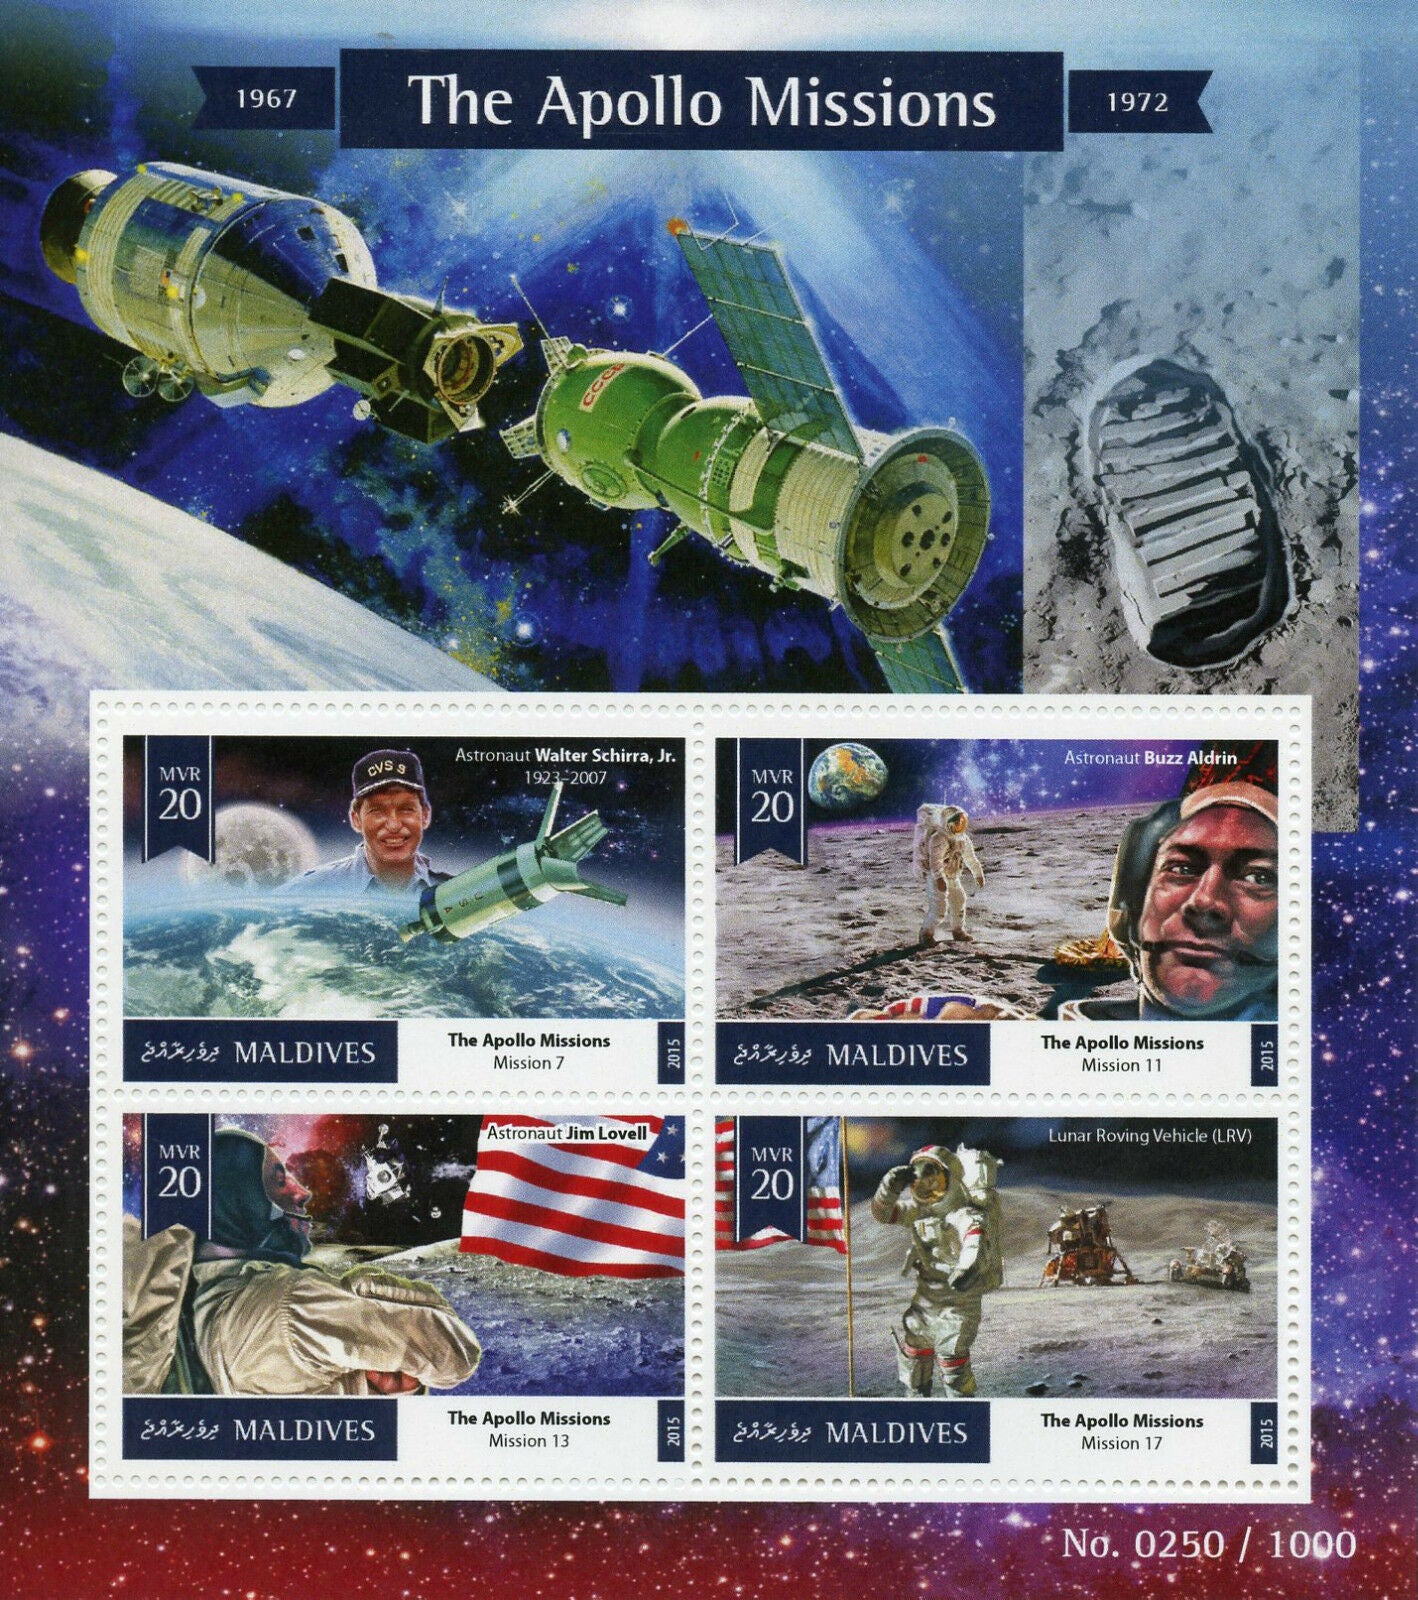 Maldives 2015 MNH Space Stamps Apollo Missions Astronauts Buzz Aldrin Jim Lovell 4v M/S